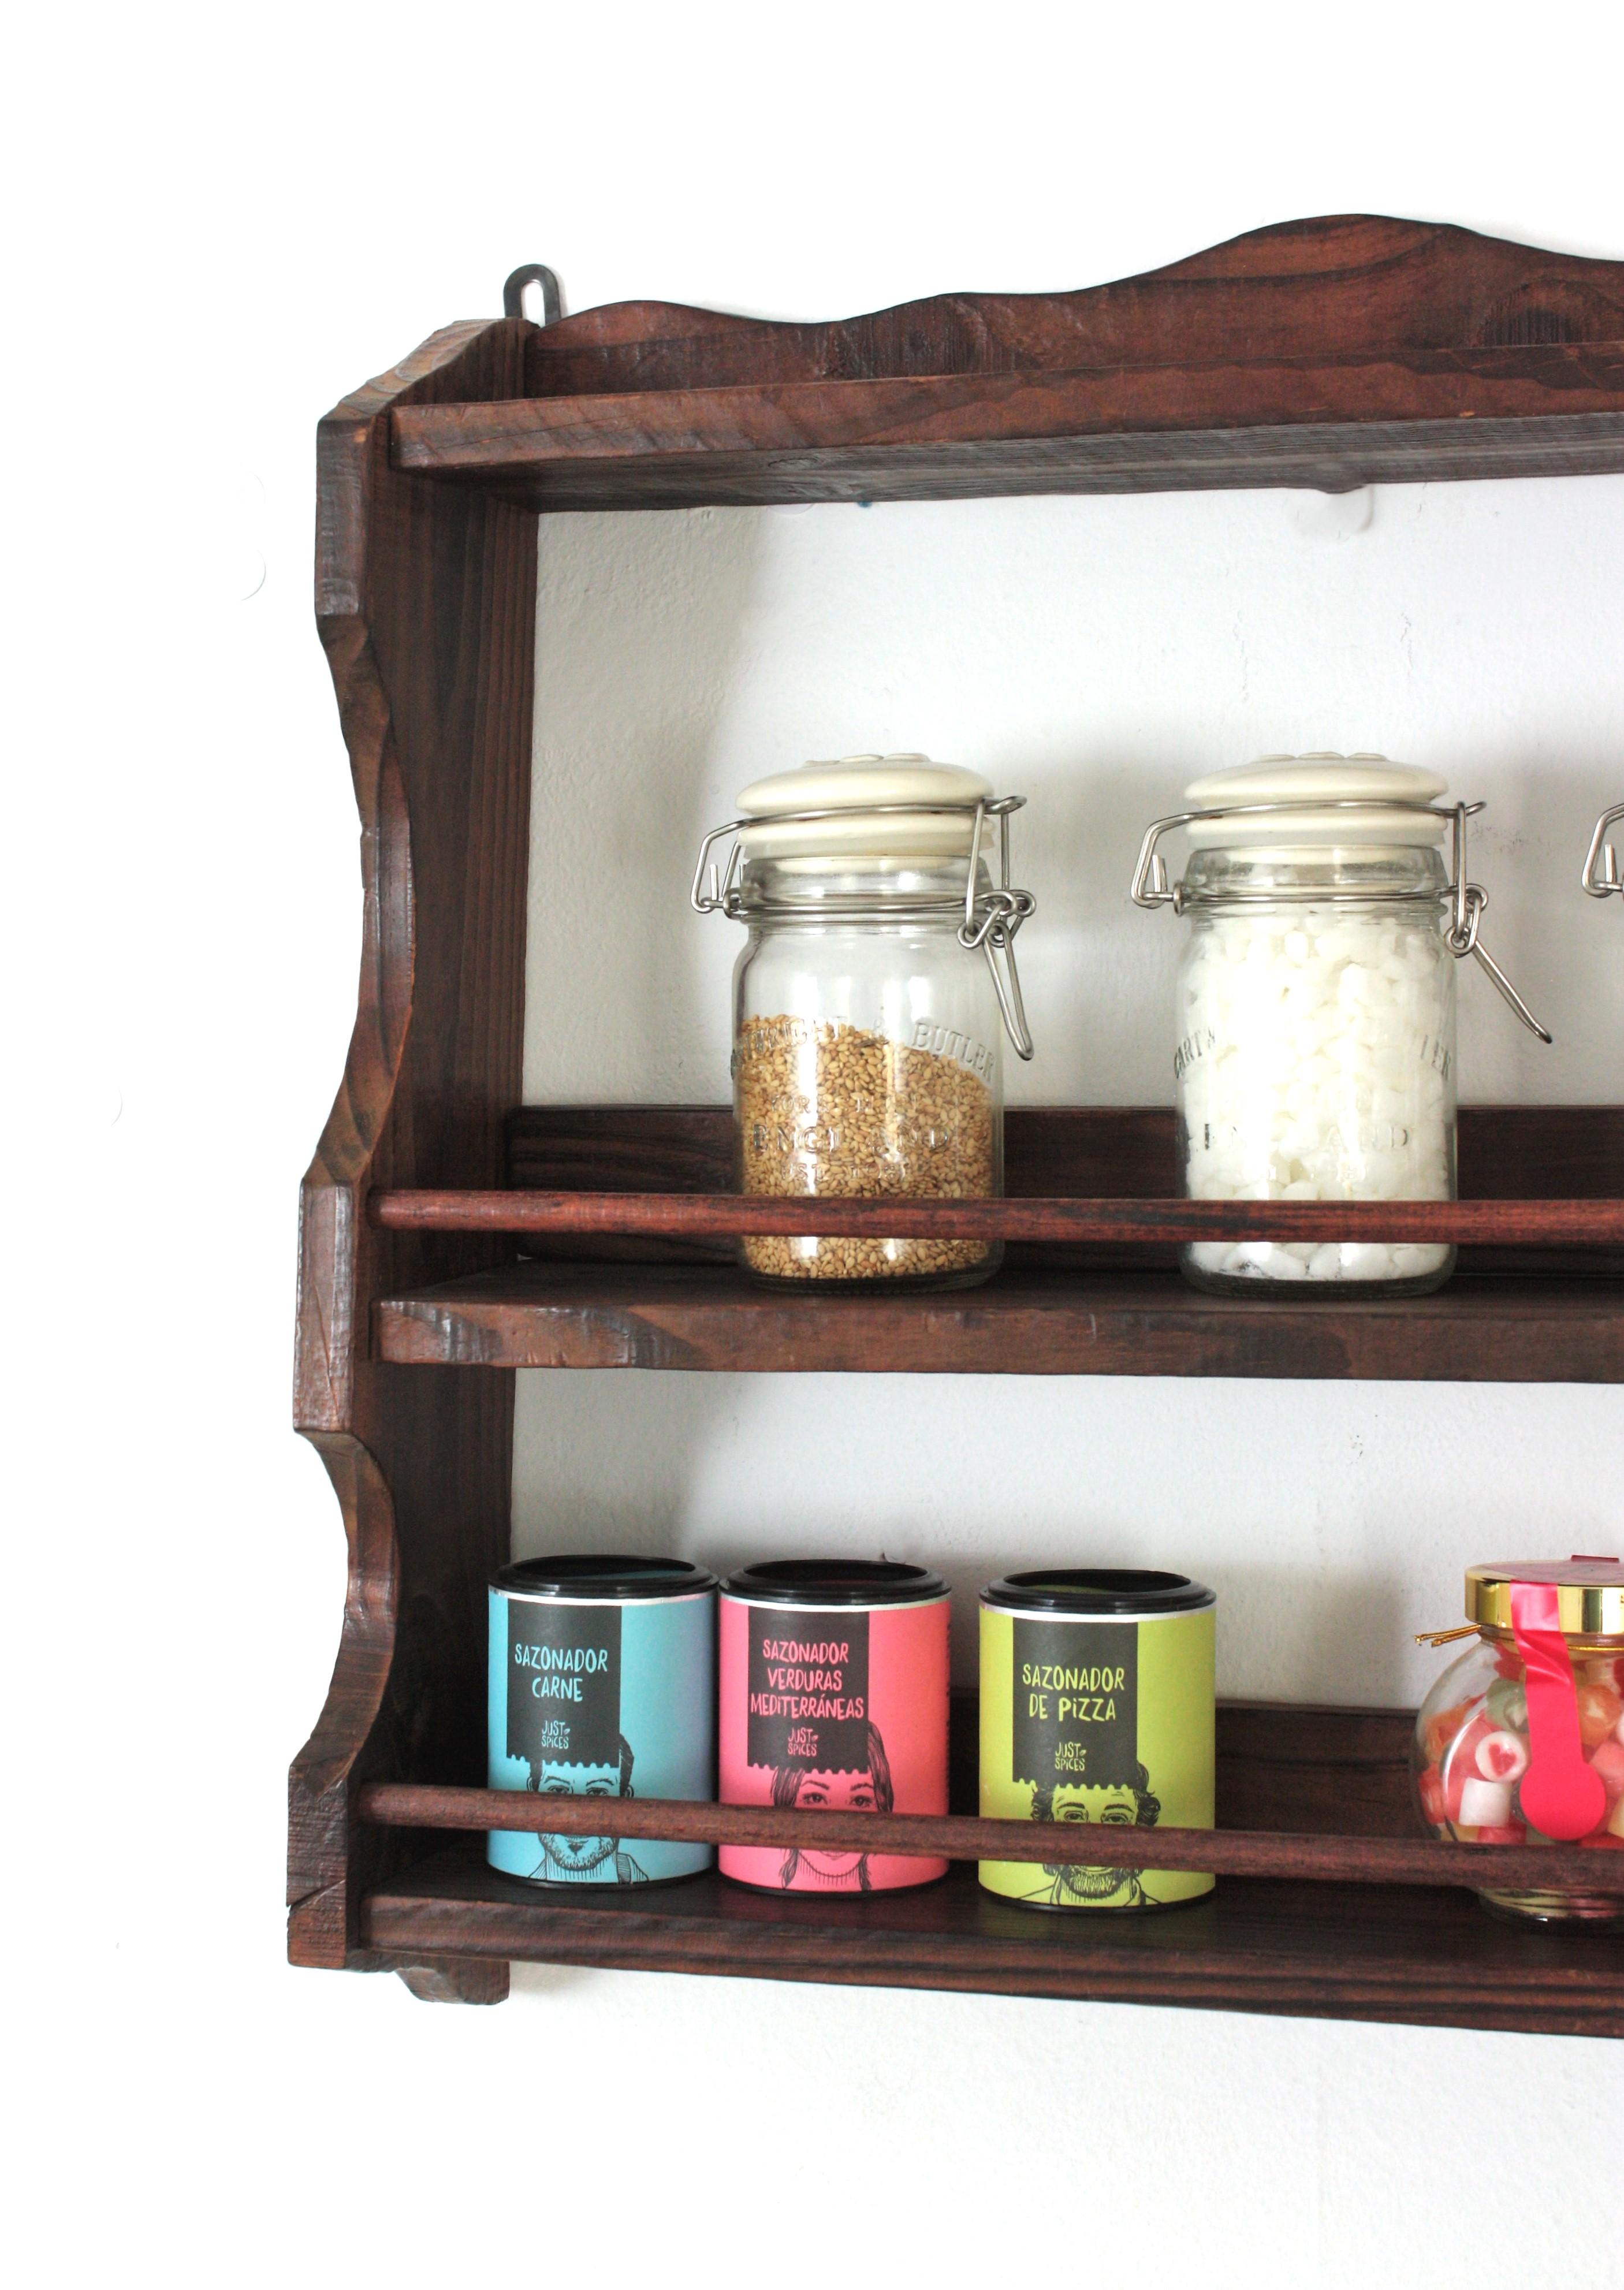 Spanish Colonial Wood Spice Rack Wall Shelf, 1940s For Sale 2